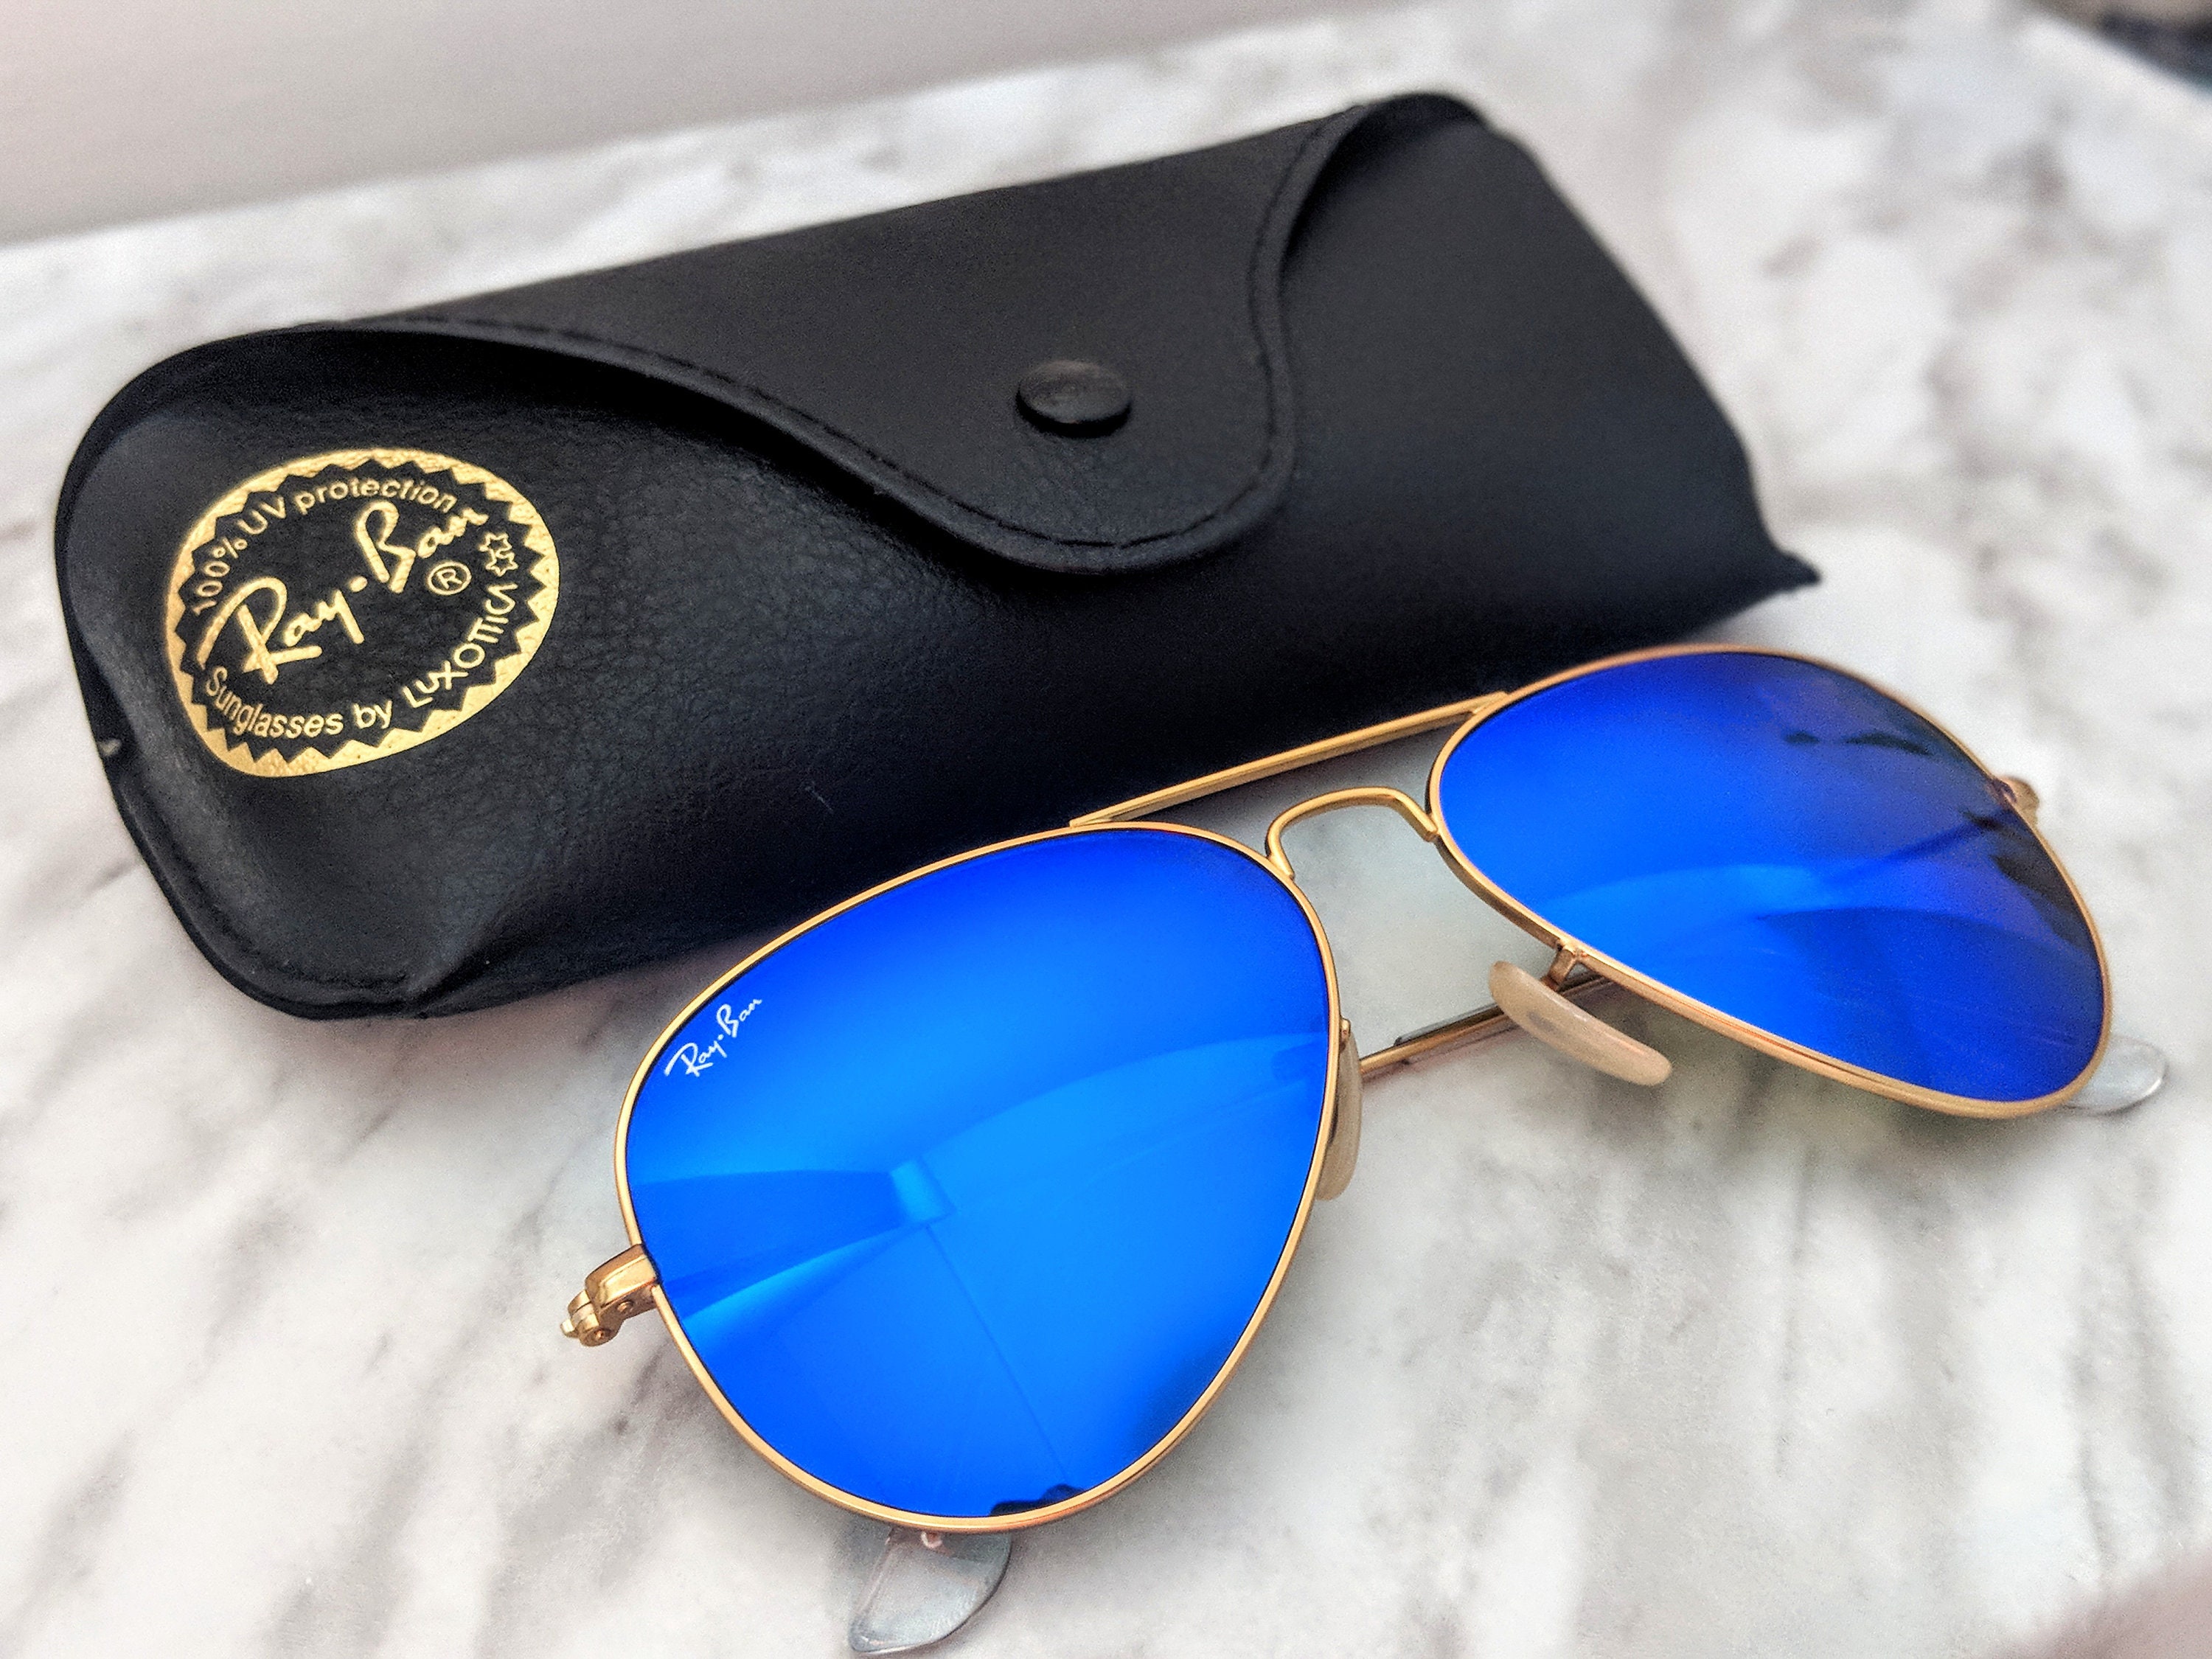 Buy Blue Mirror Ray-ban Aviator Sunglasses Rb3025 112 / 17 Online in India  - Etsy